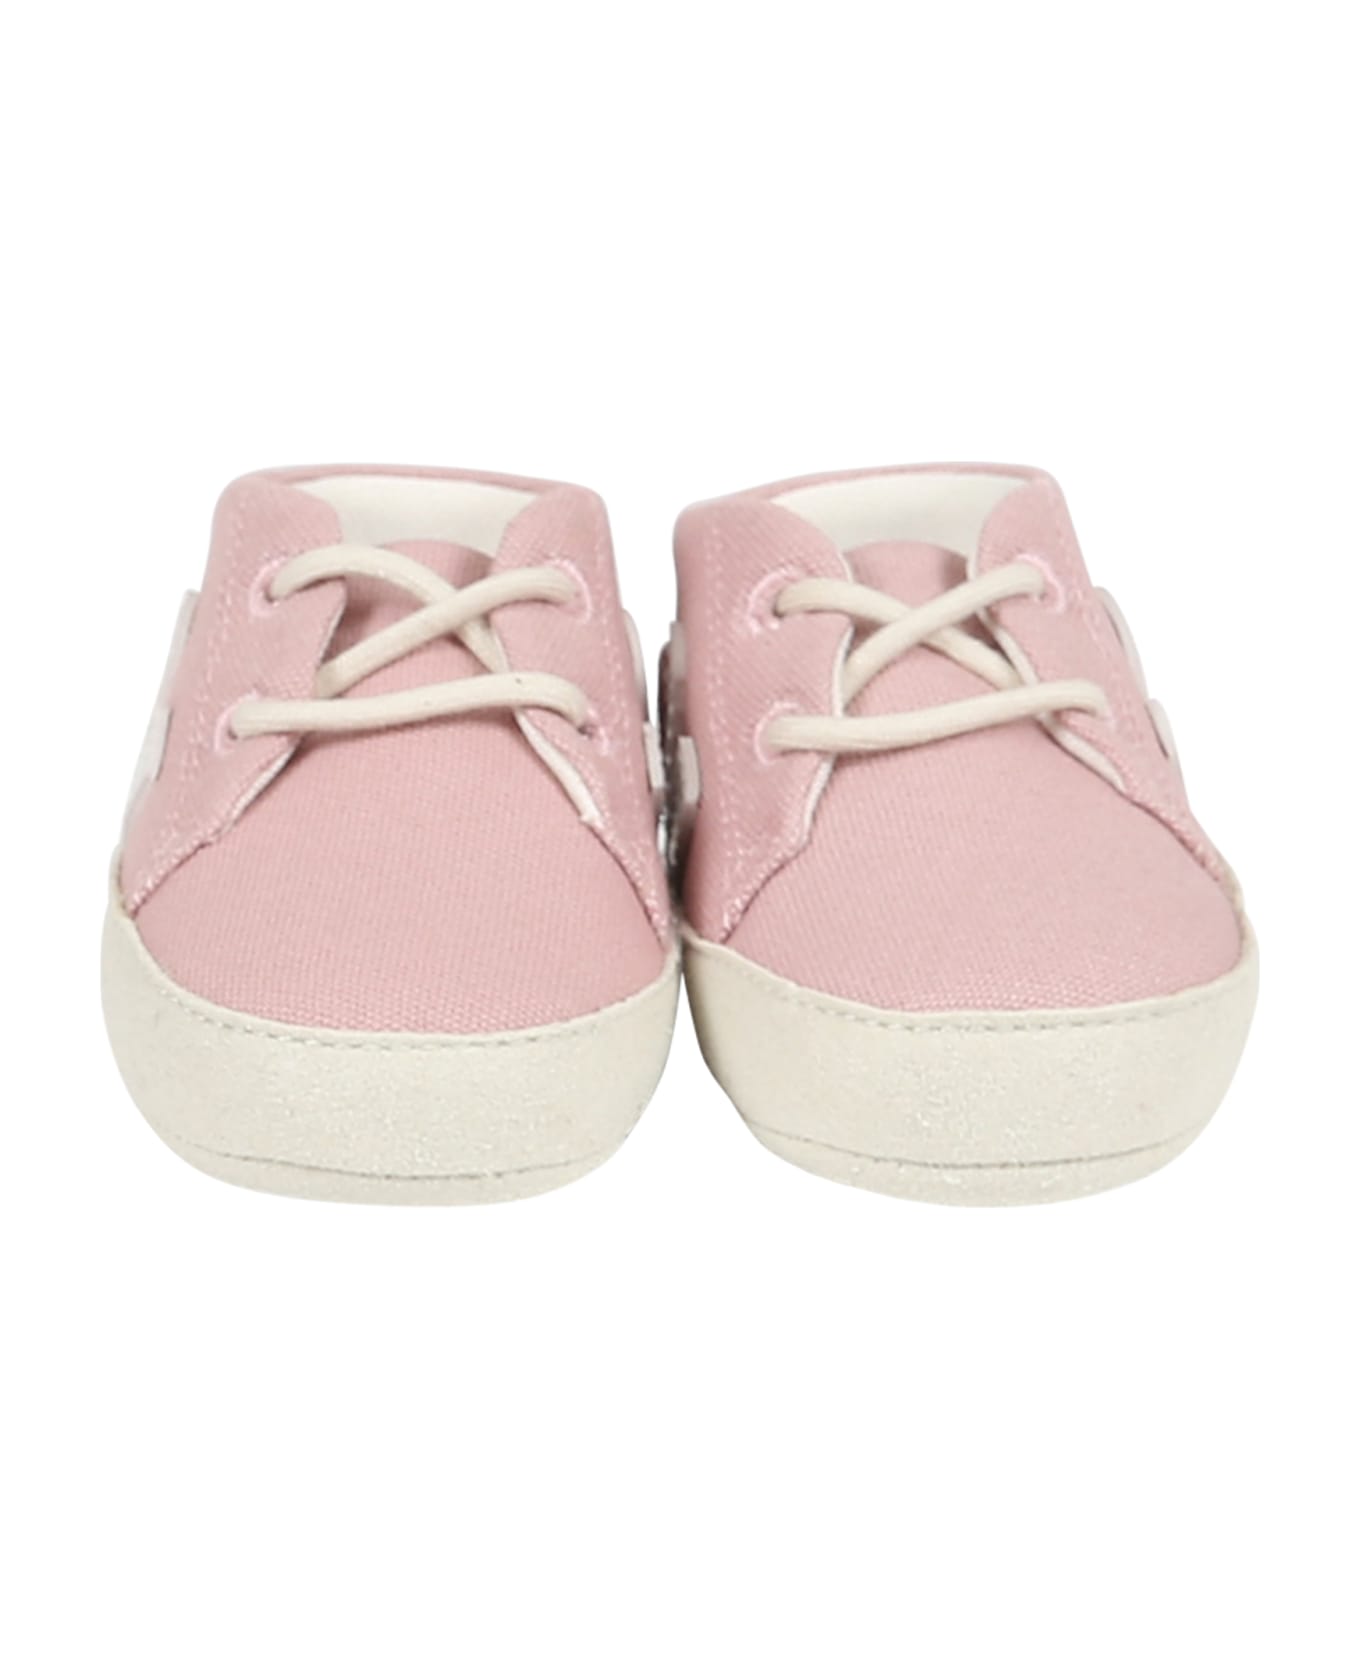 Veja Pink Sneakers For Baby Girl With White Logo - Pink